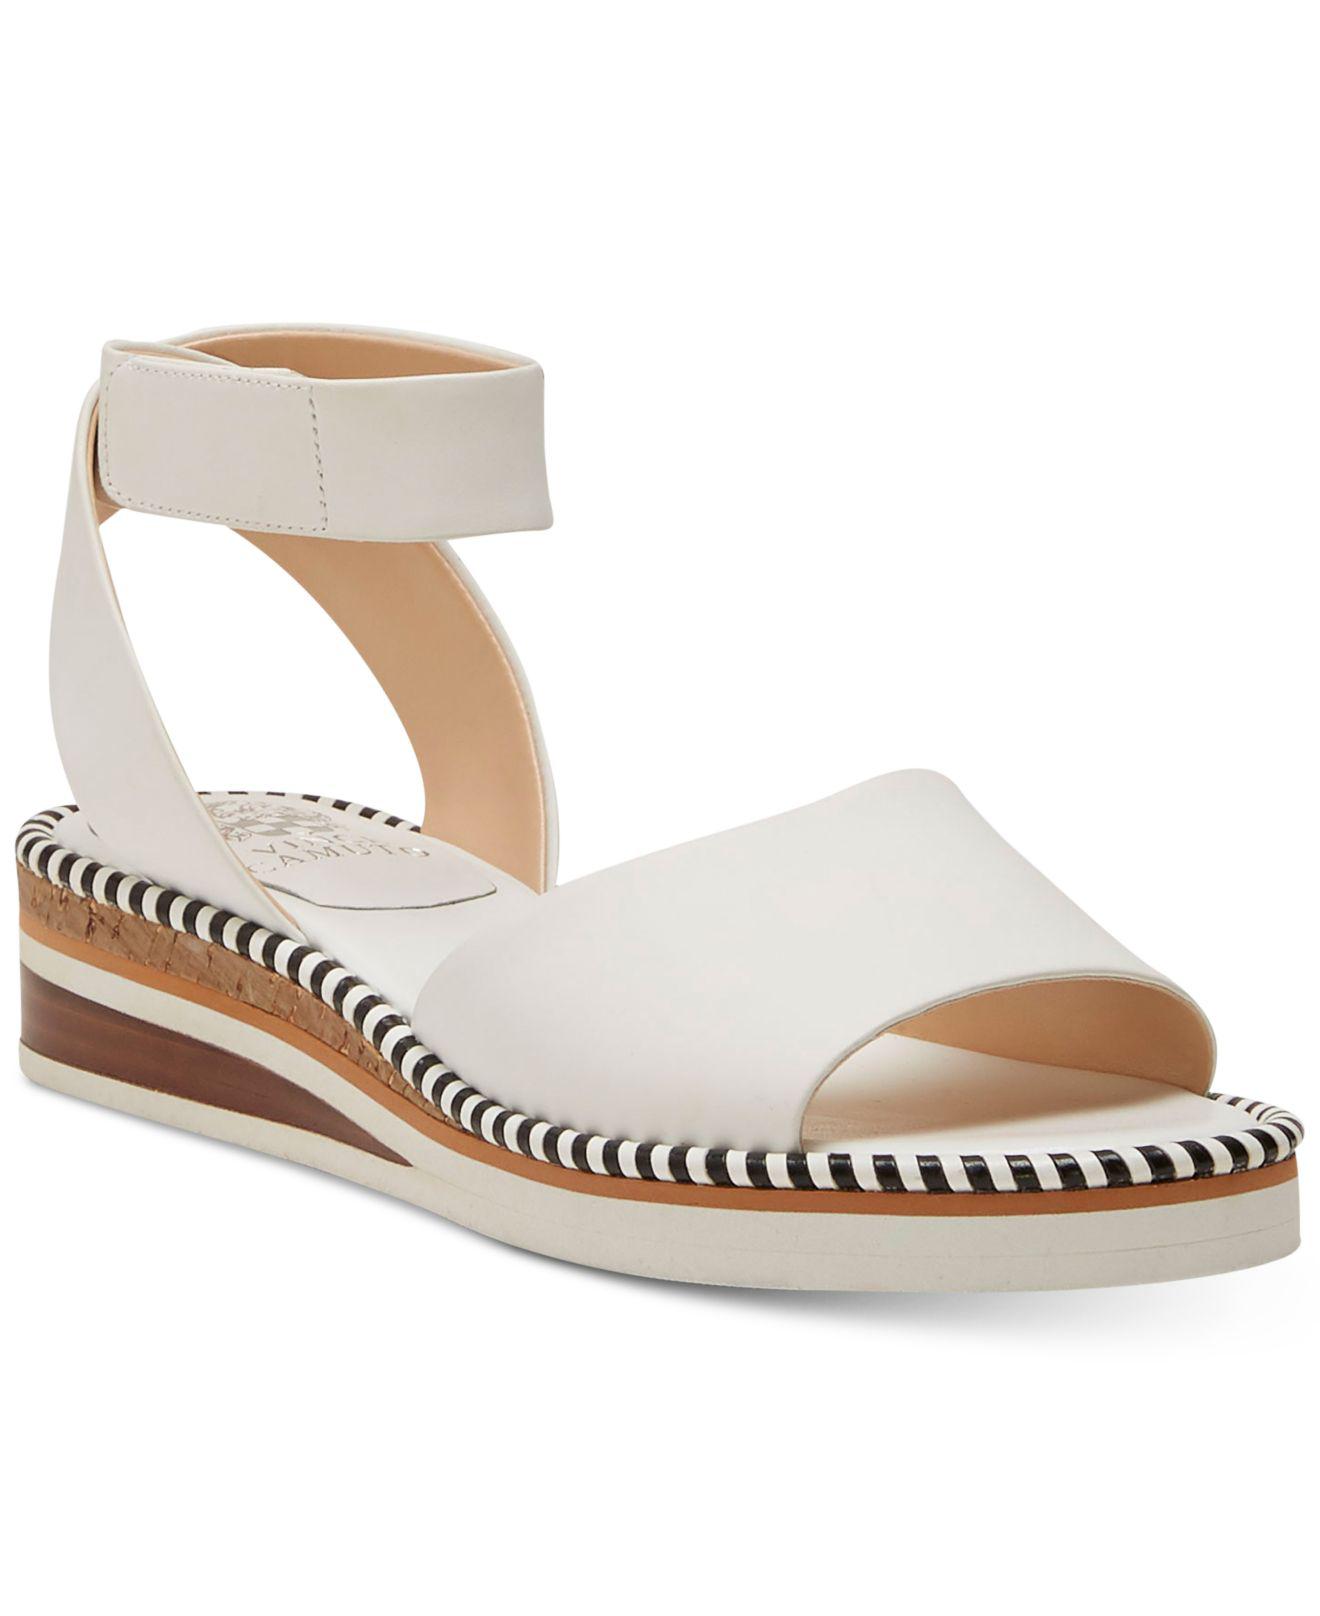 Vince Camuto Leather Moirina Stacked Platform Sandal in White - Lyst